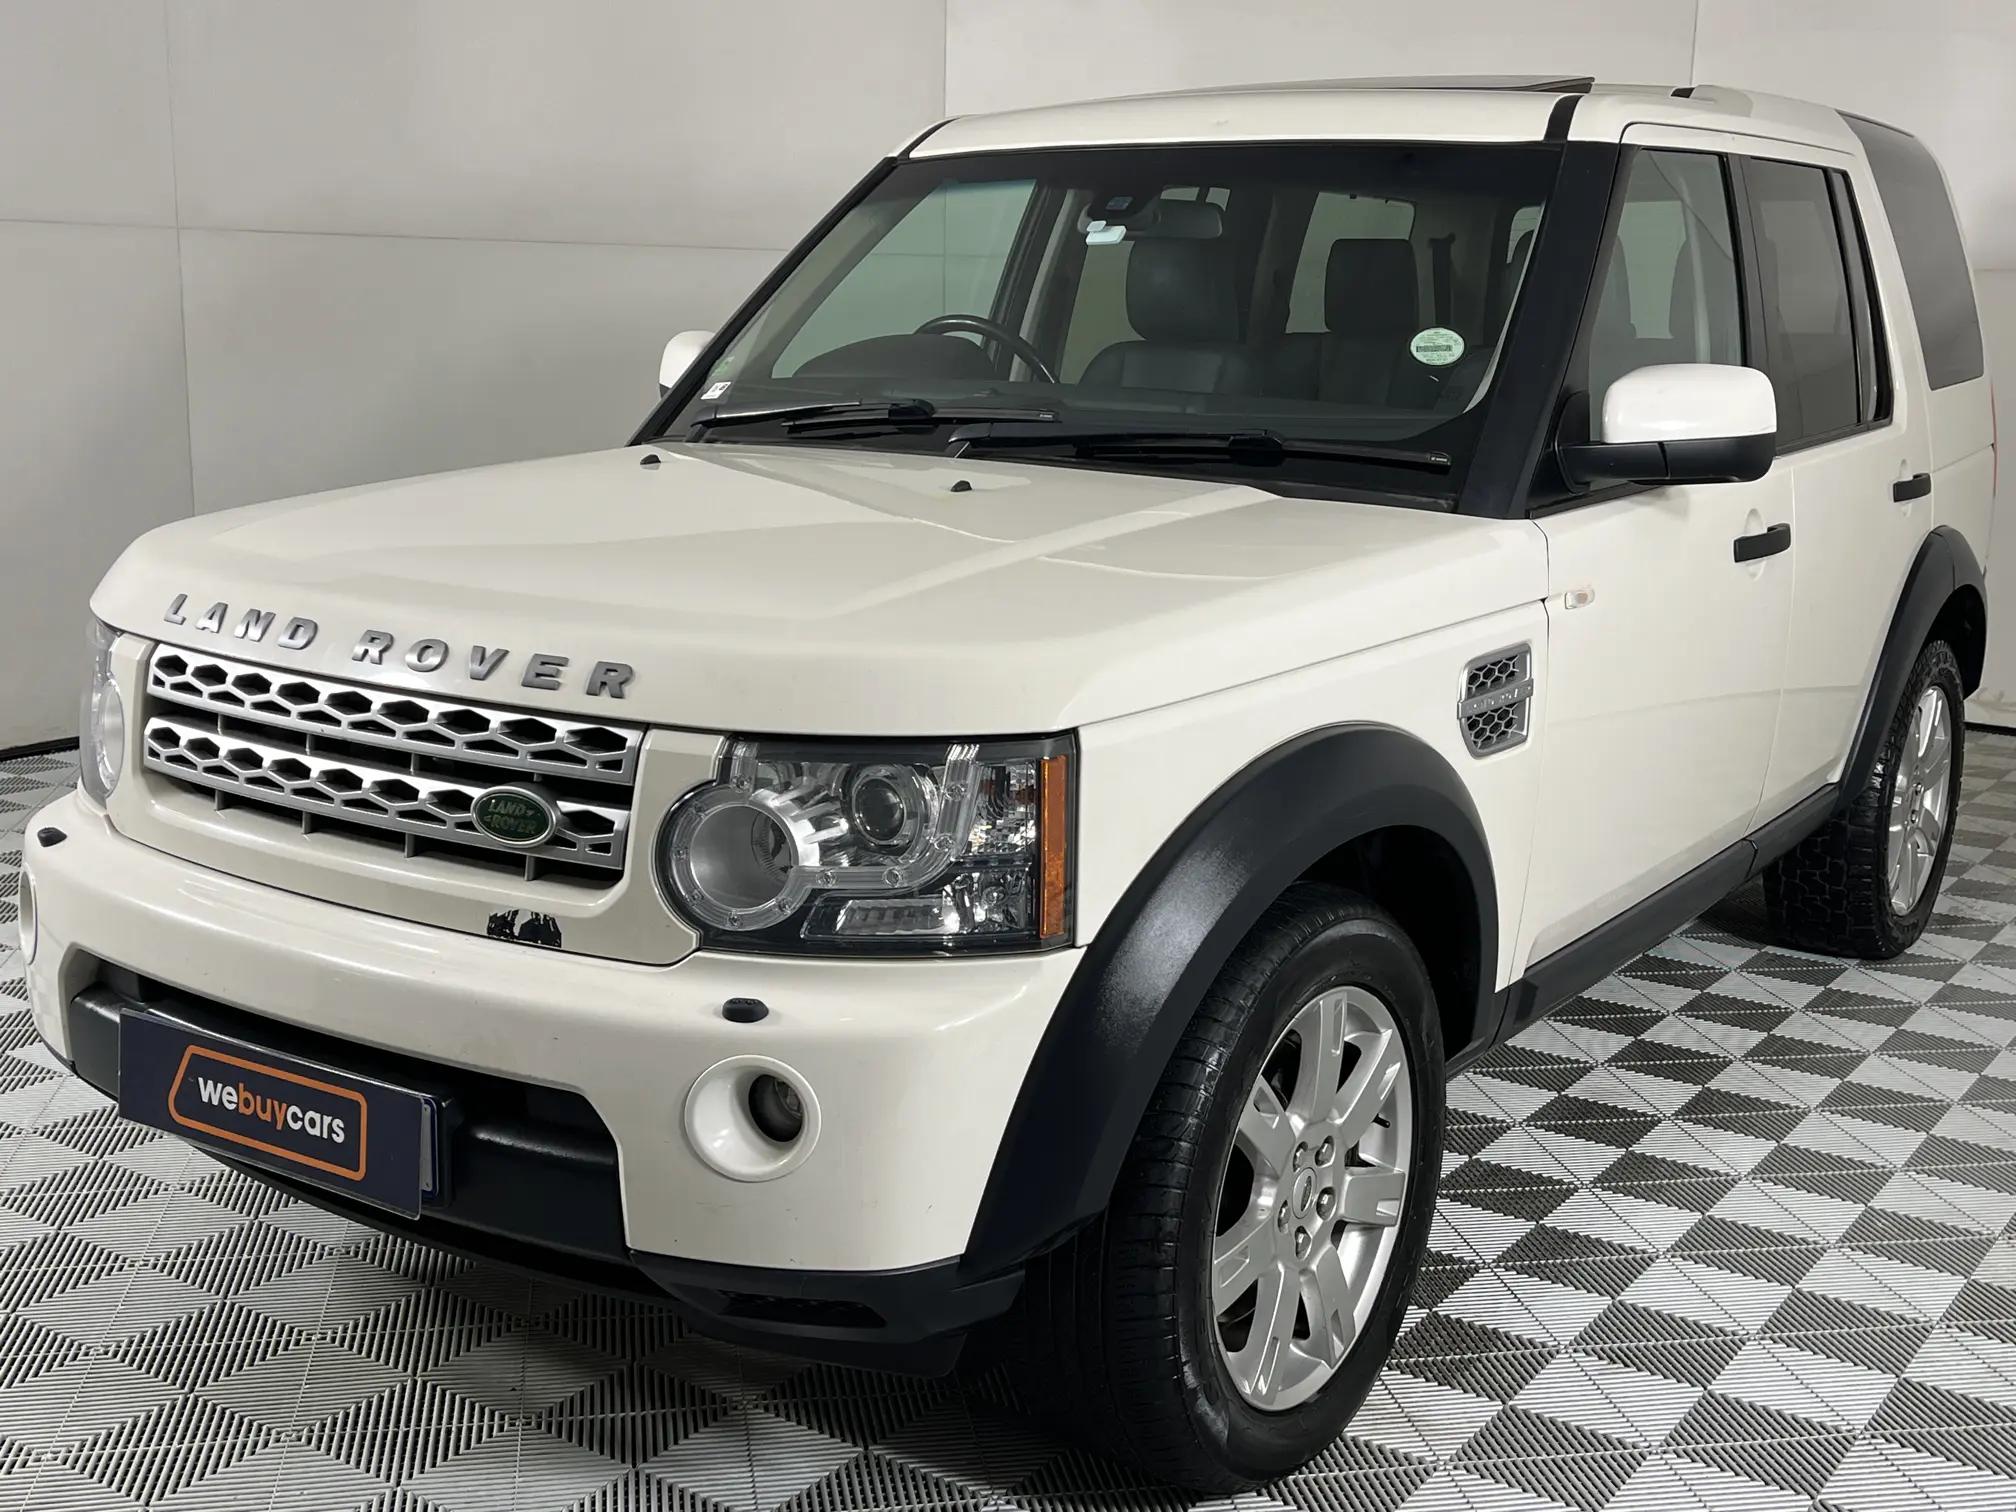 Land Rover Discovery 4 3.0 TD SD V6 HSE